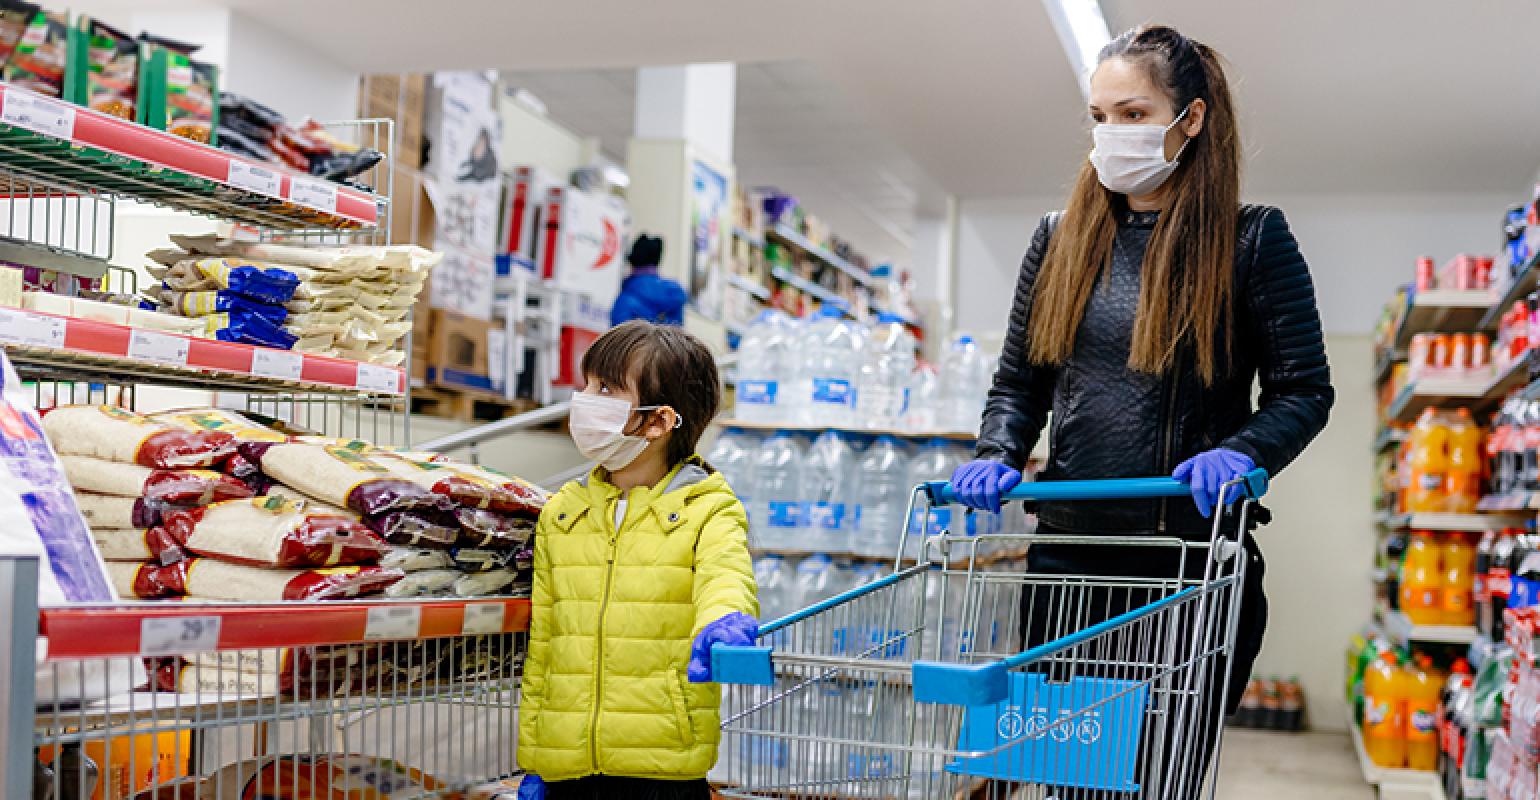 What questions should we be asking consumers during a global pandemic?